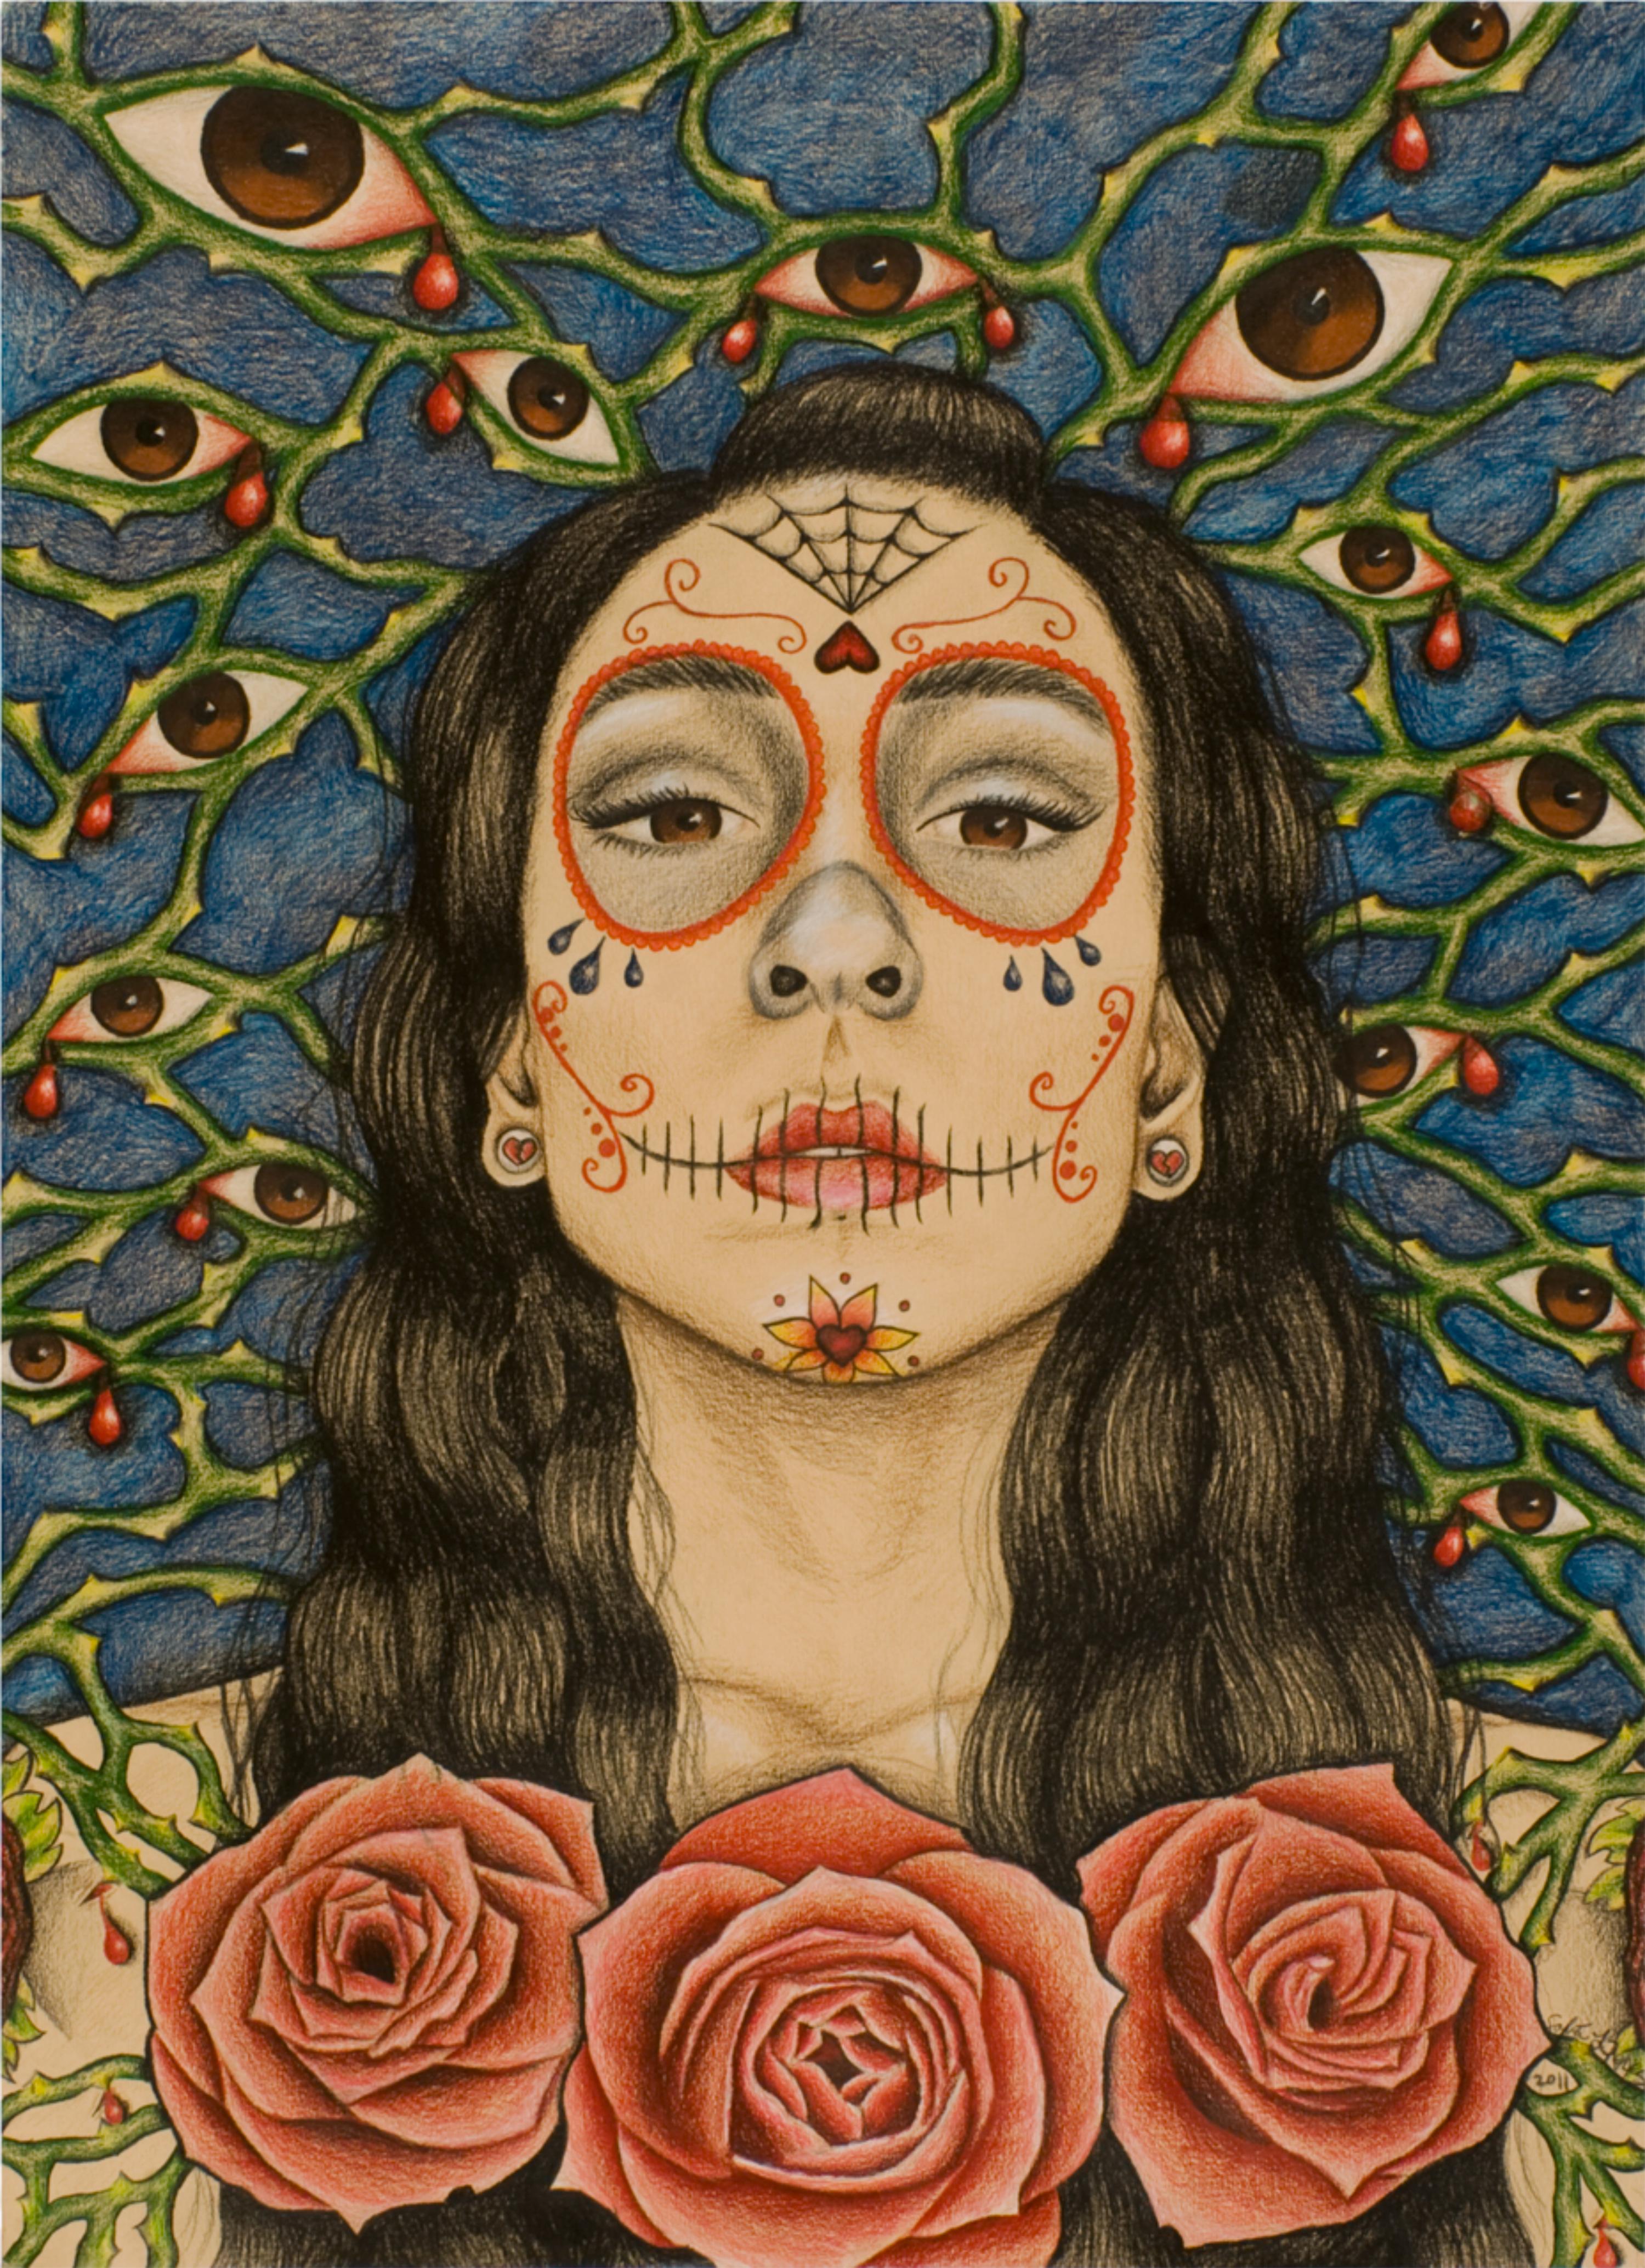 Sugar skull artwork submitted by student Sofia Perez